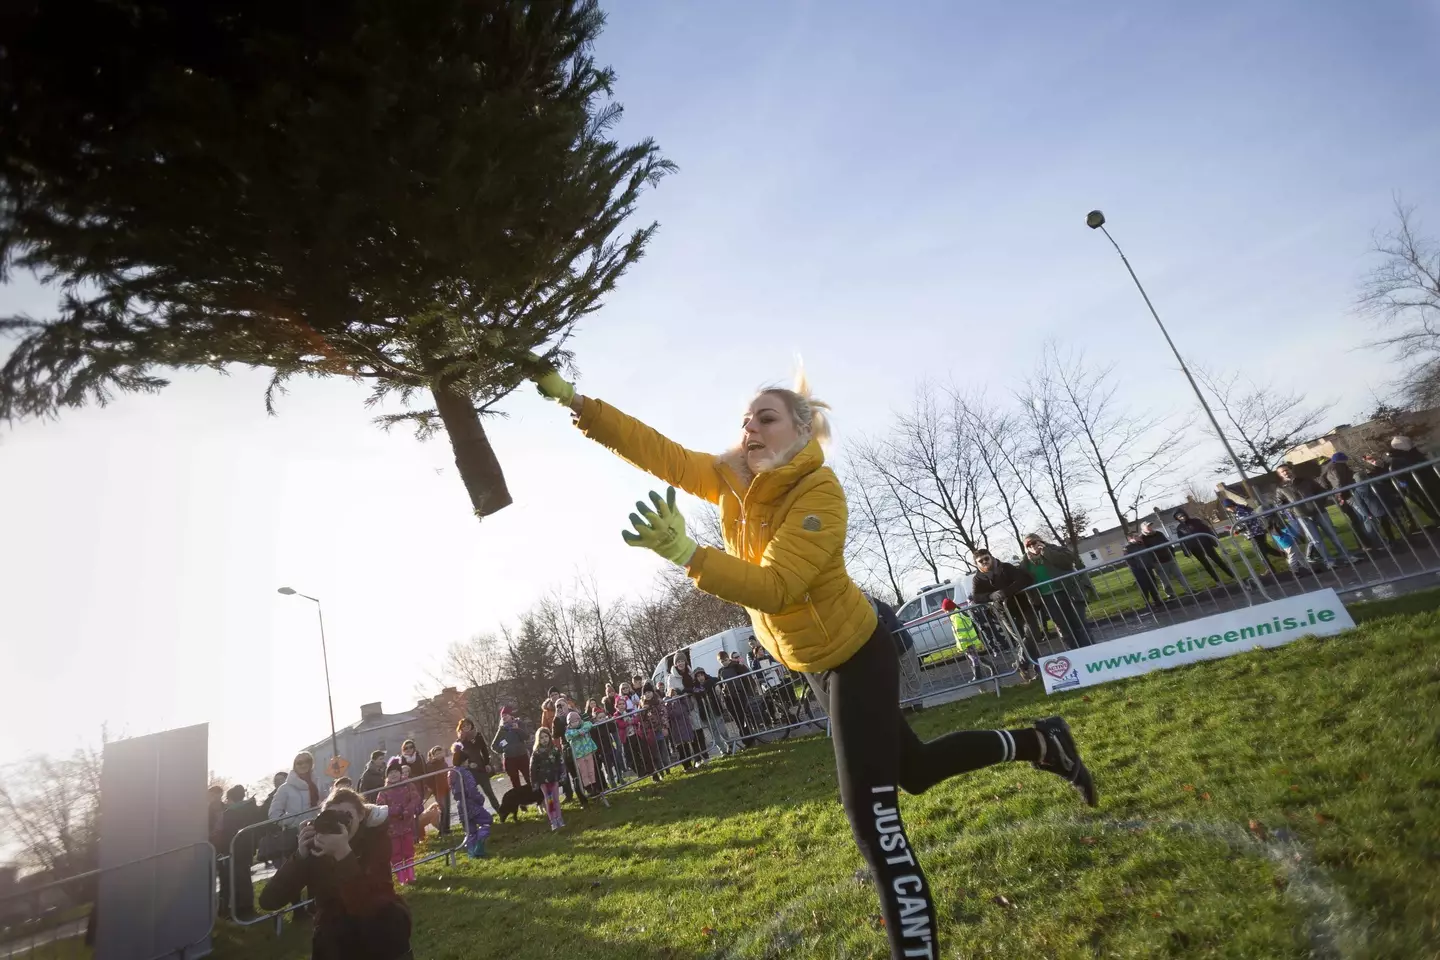 She claimed she was in serious and constant pain due to her injuries, but she was able to win a Christmas tree throwing competition.